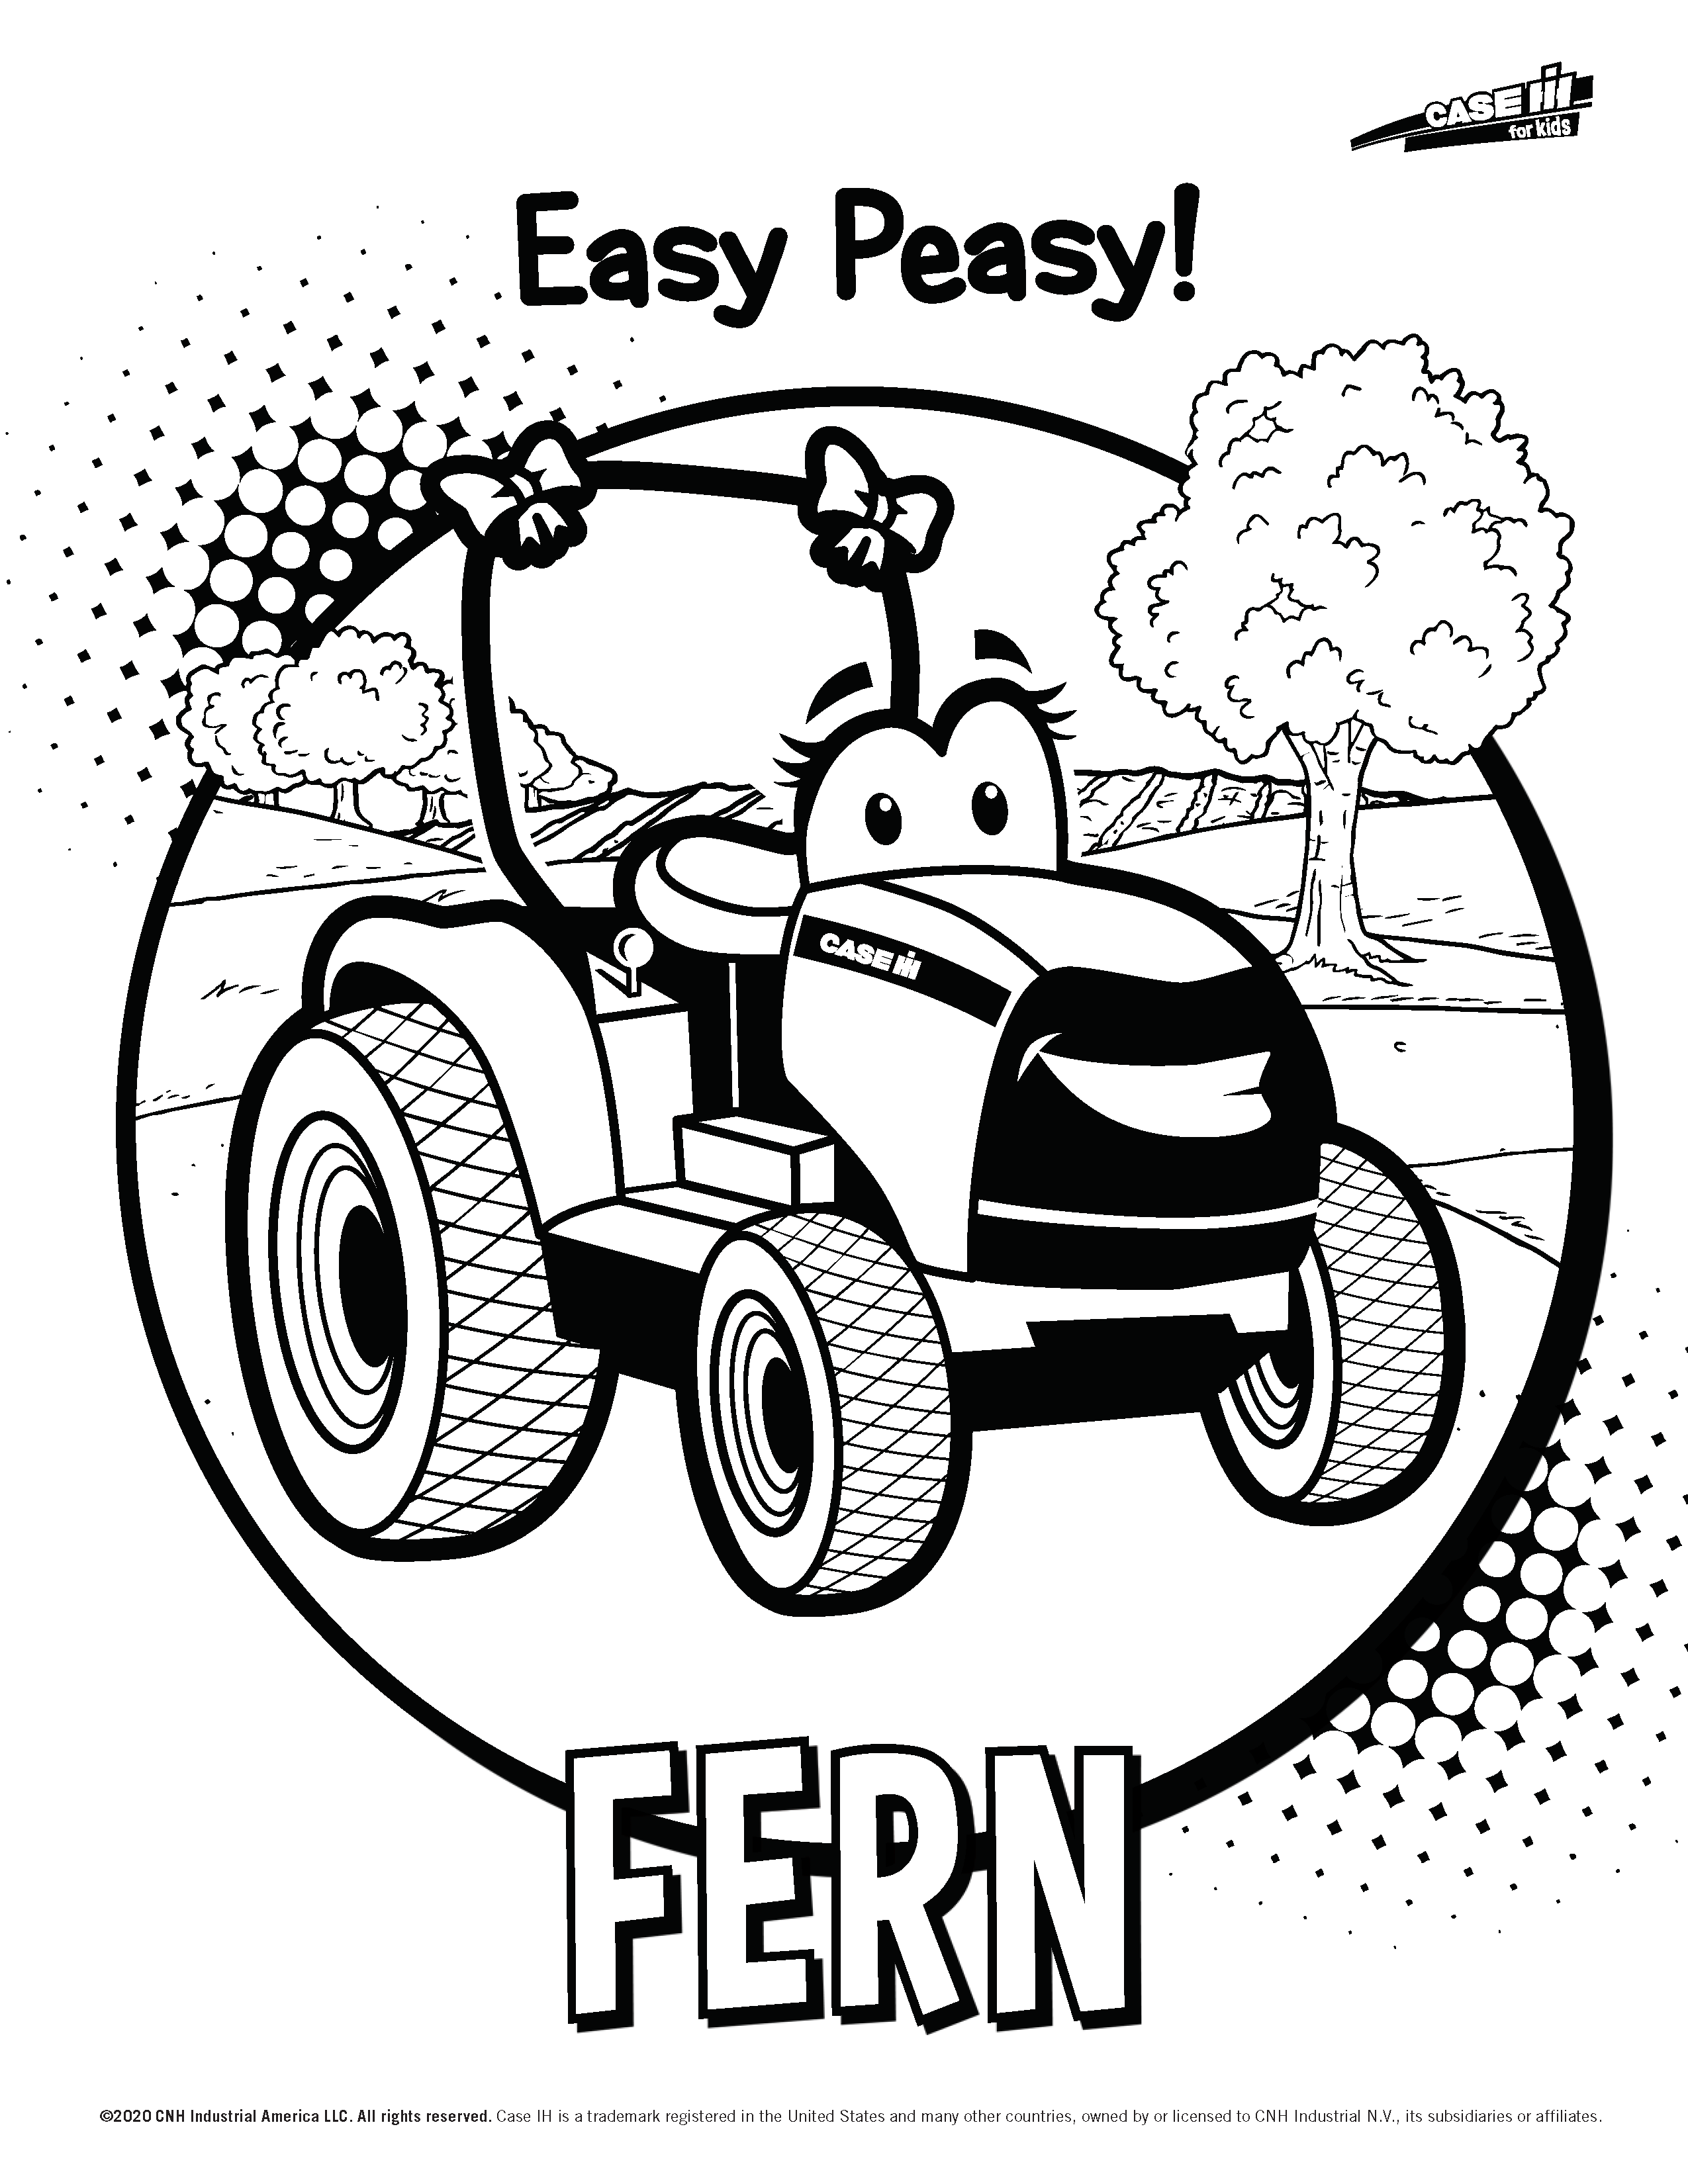 Casey and Friends_Fern_01.png